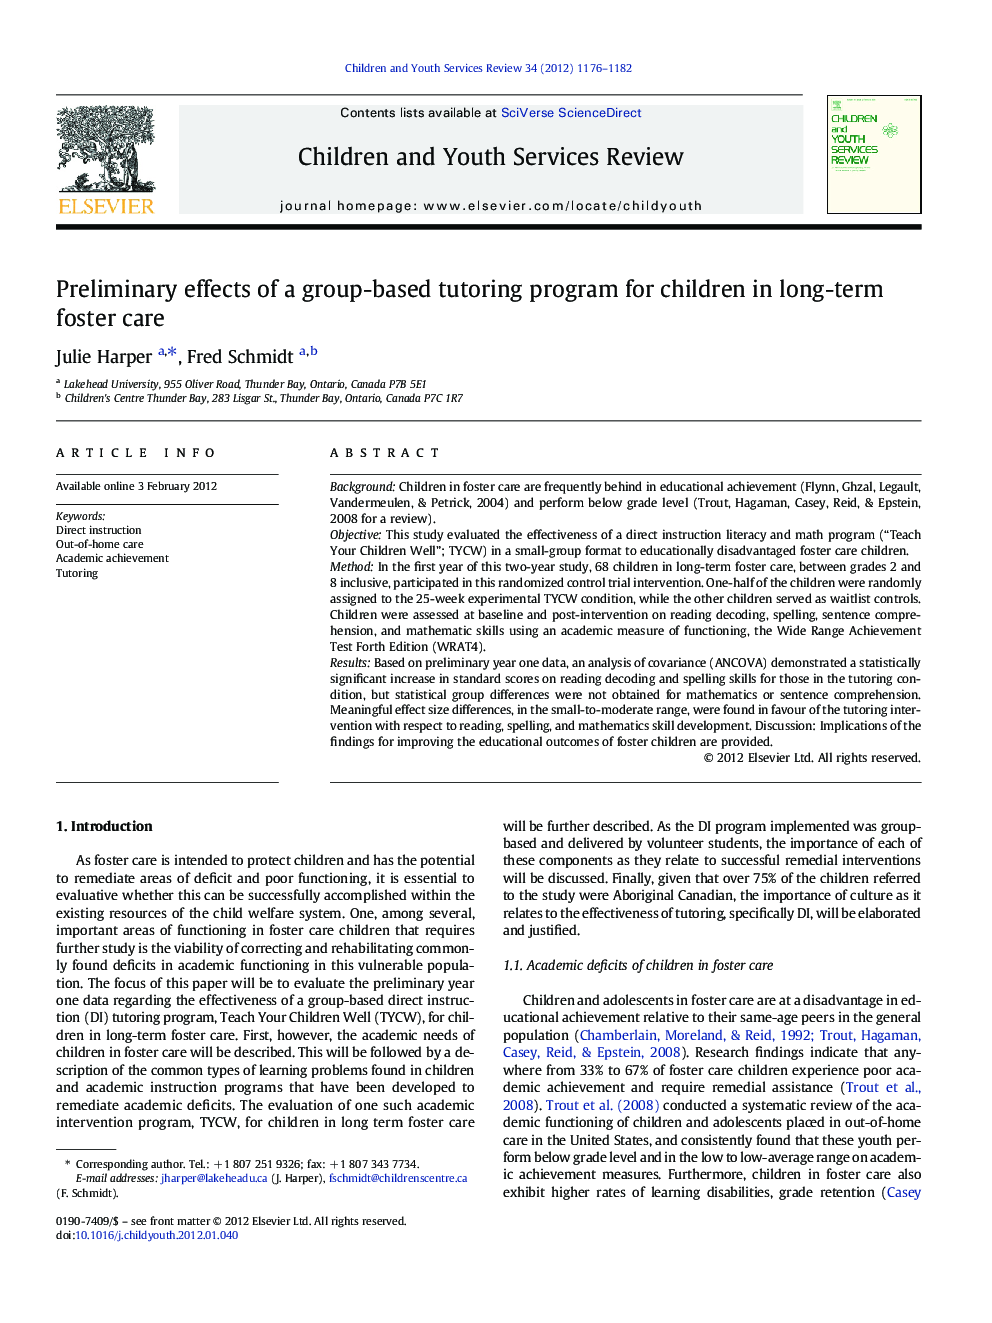 Preliminary effects of a group-based tutoring program for children in long-term foster care